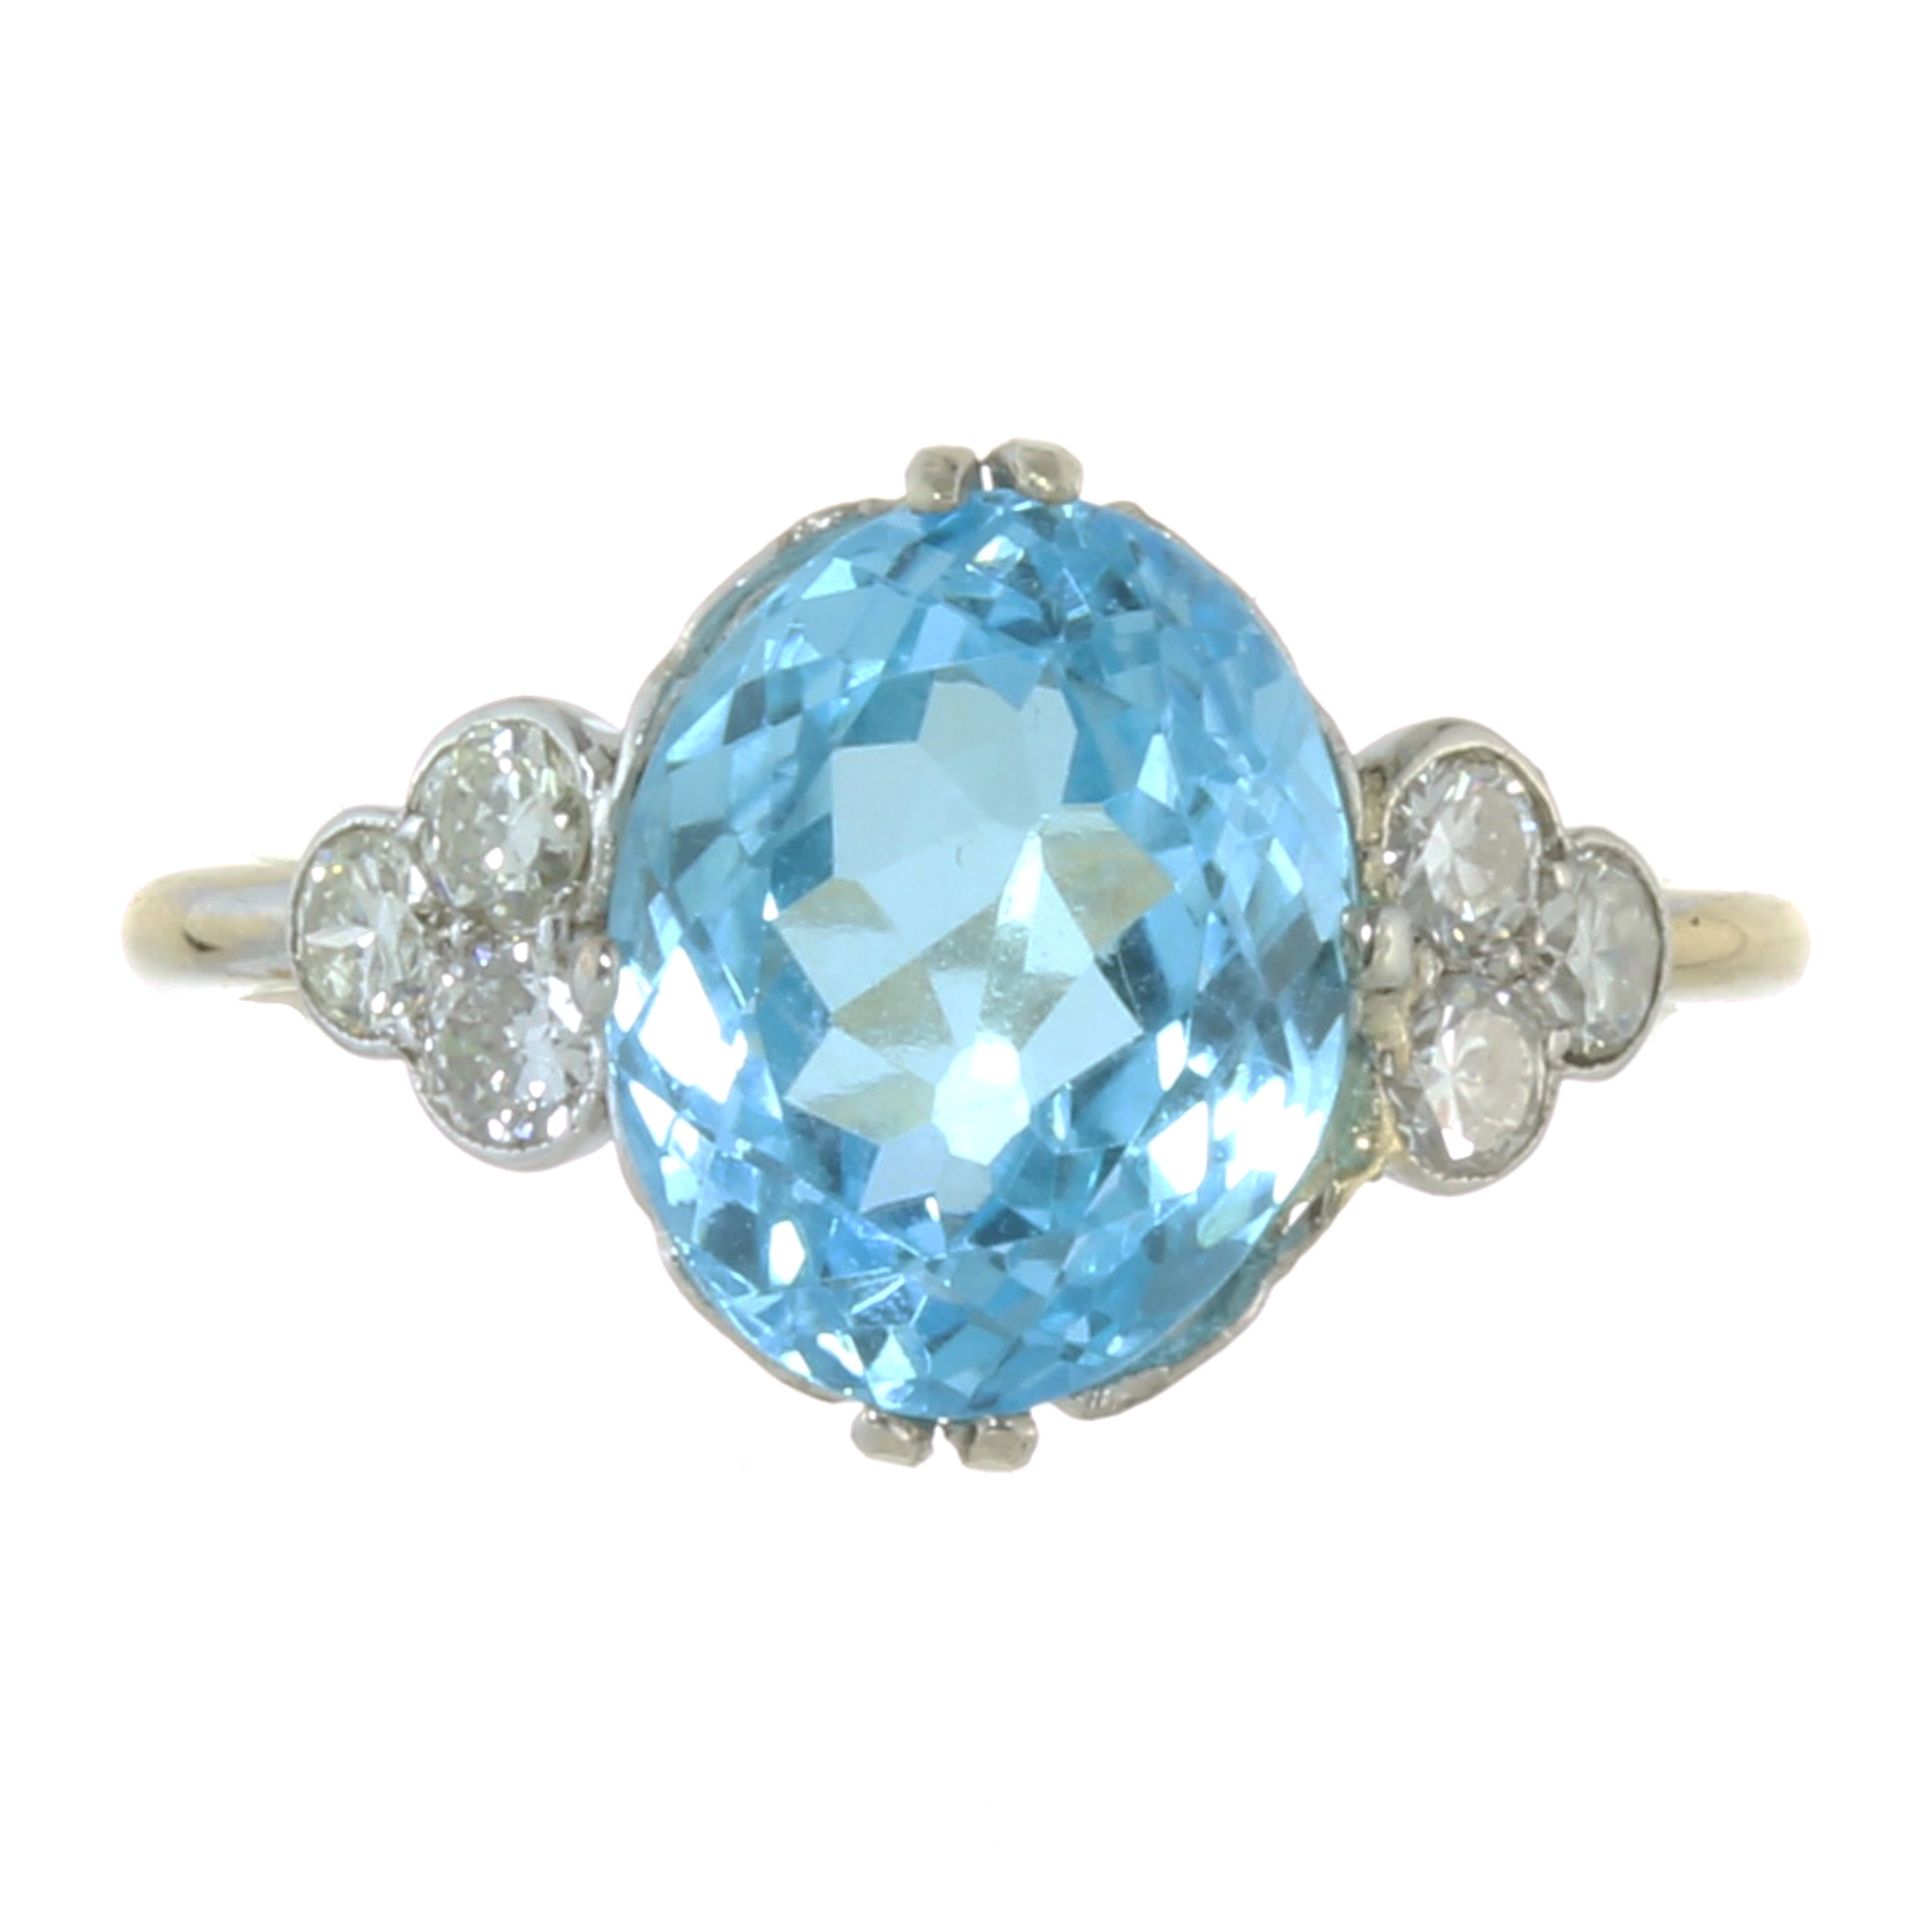 A BLUE TOPAZ AND DIAMOND DRESS RING in 18ct yellow gold and platinum, set with a central oval cut